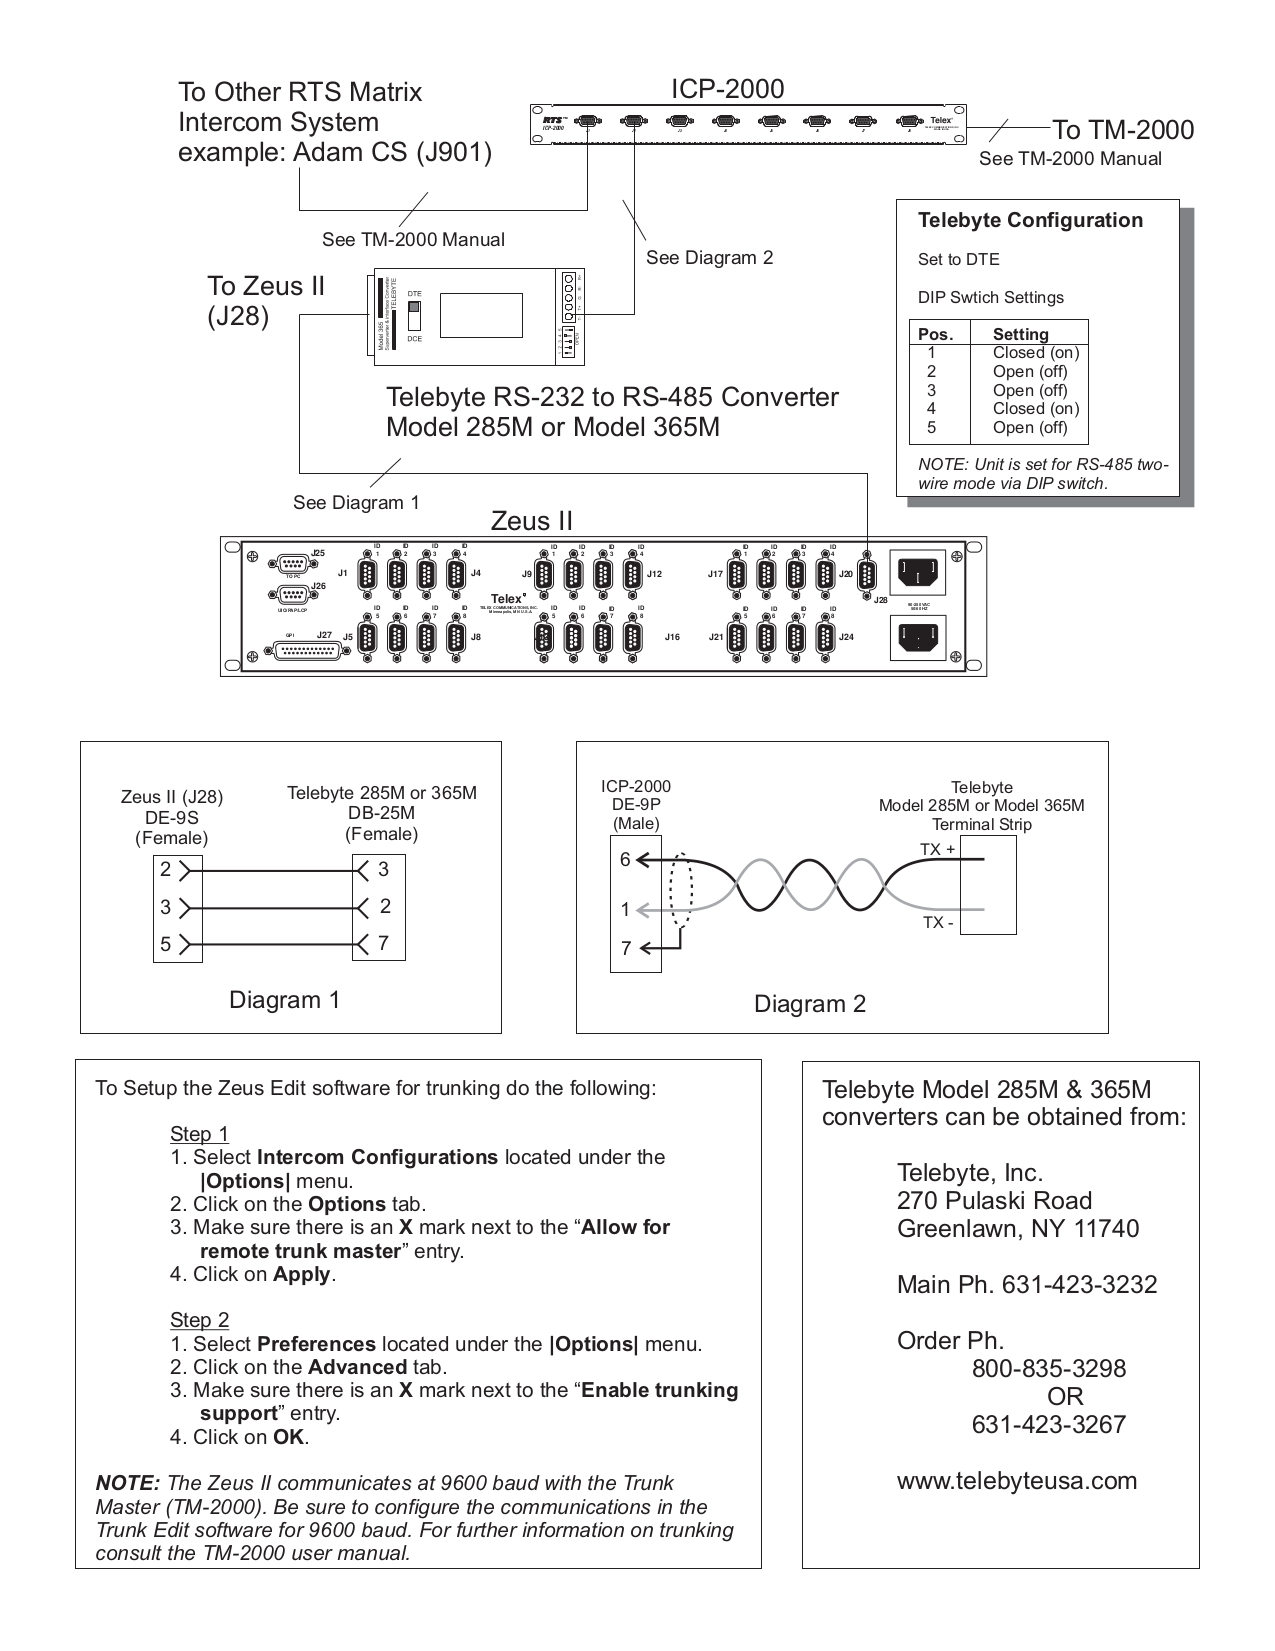 Telex Other SSA-324 IntercomSystem pdf page preview